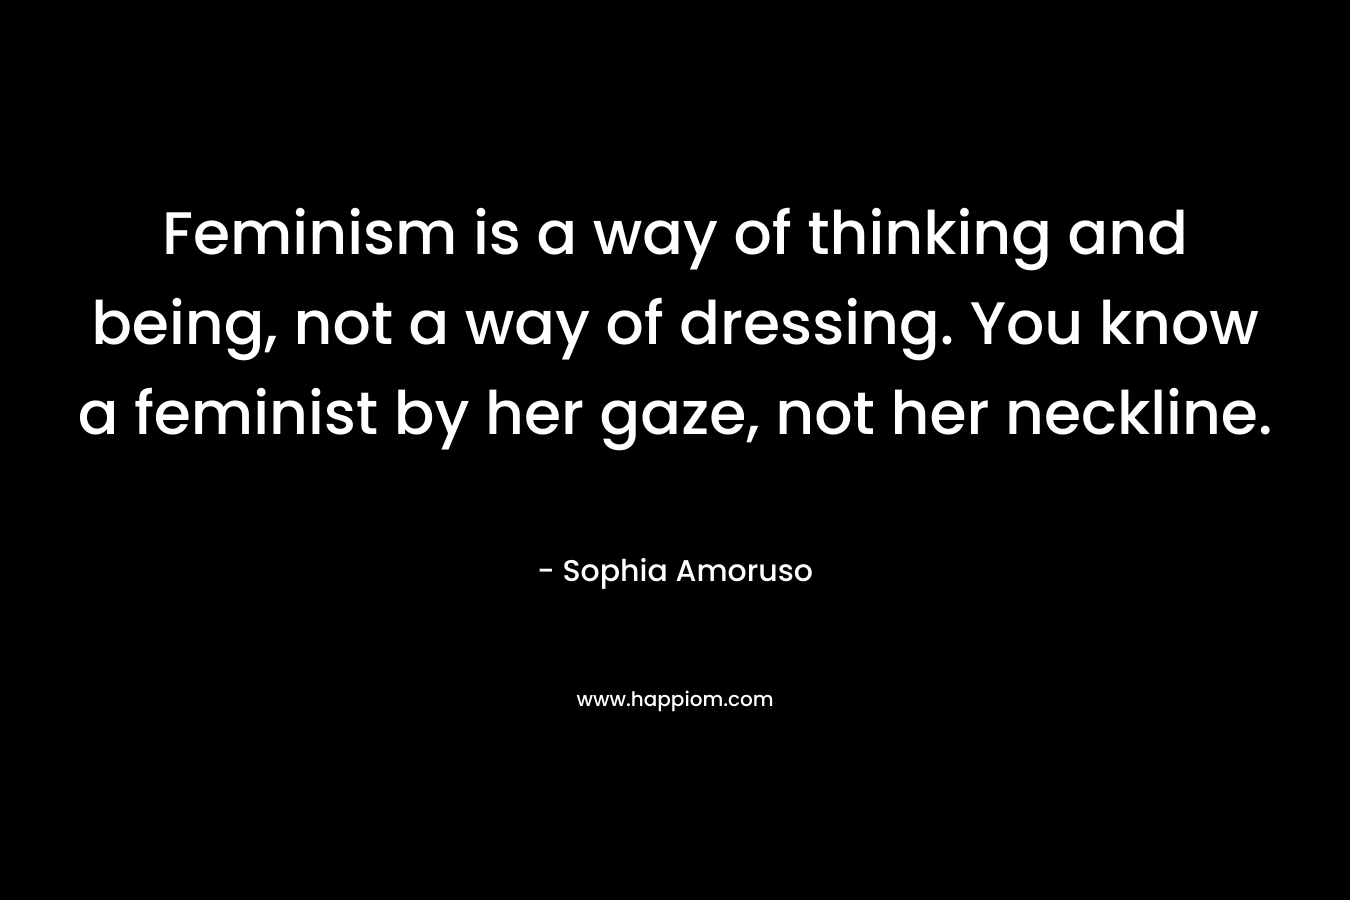 Feminism is a way of thinking and being, not a way of dressing. You know a feminist by her gaze, not her neckline. – Sophia Amoruso